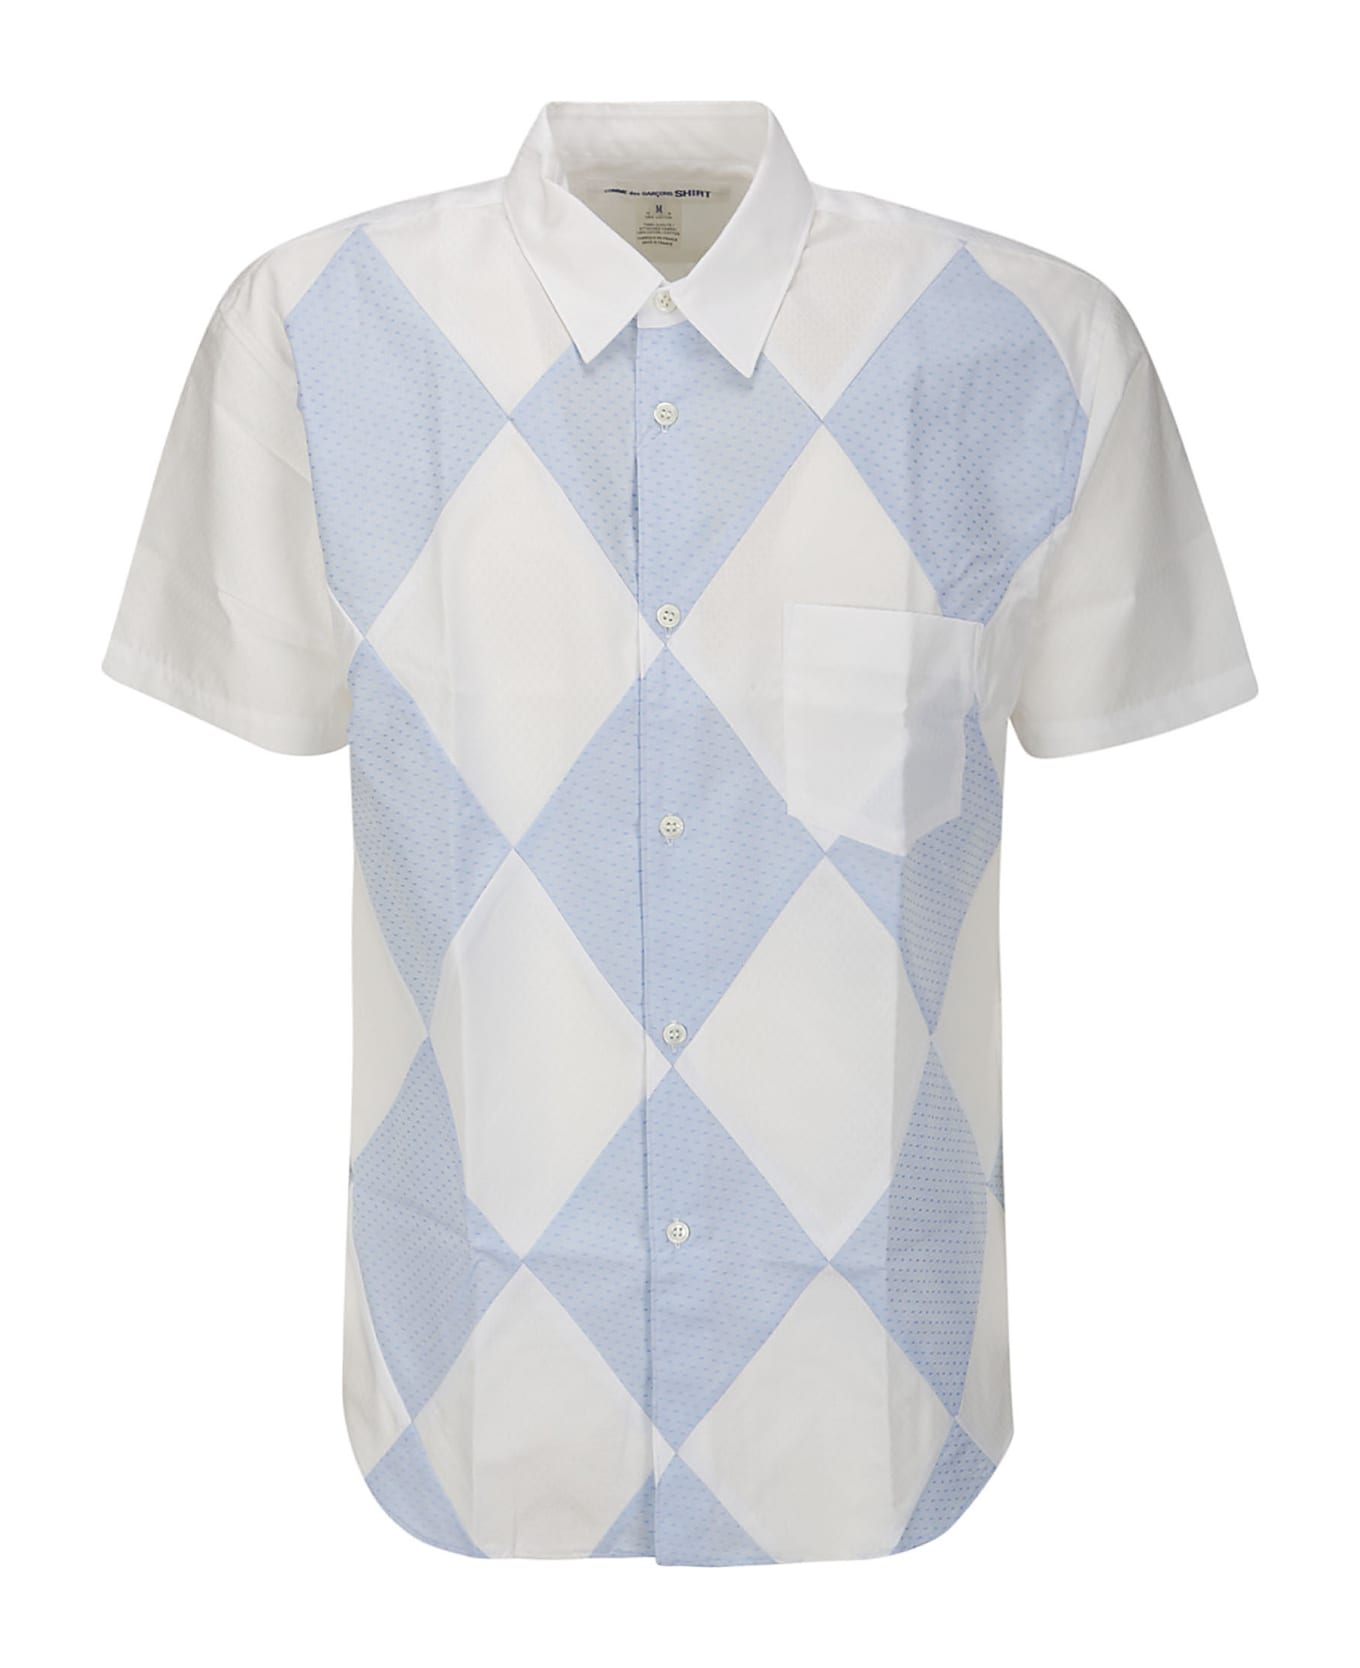 Comme des Garçons Shirt Cotton Dobby With Dot Pattern X Cotton Dobby With - WHITE/BLUE シャツ